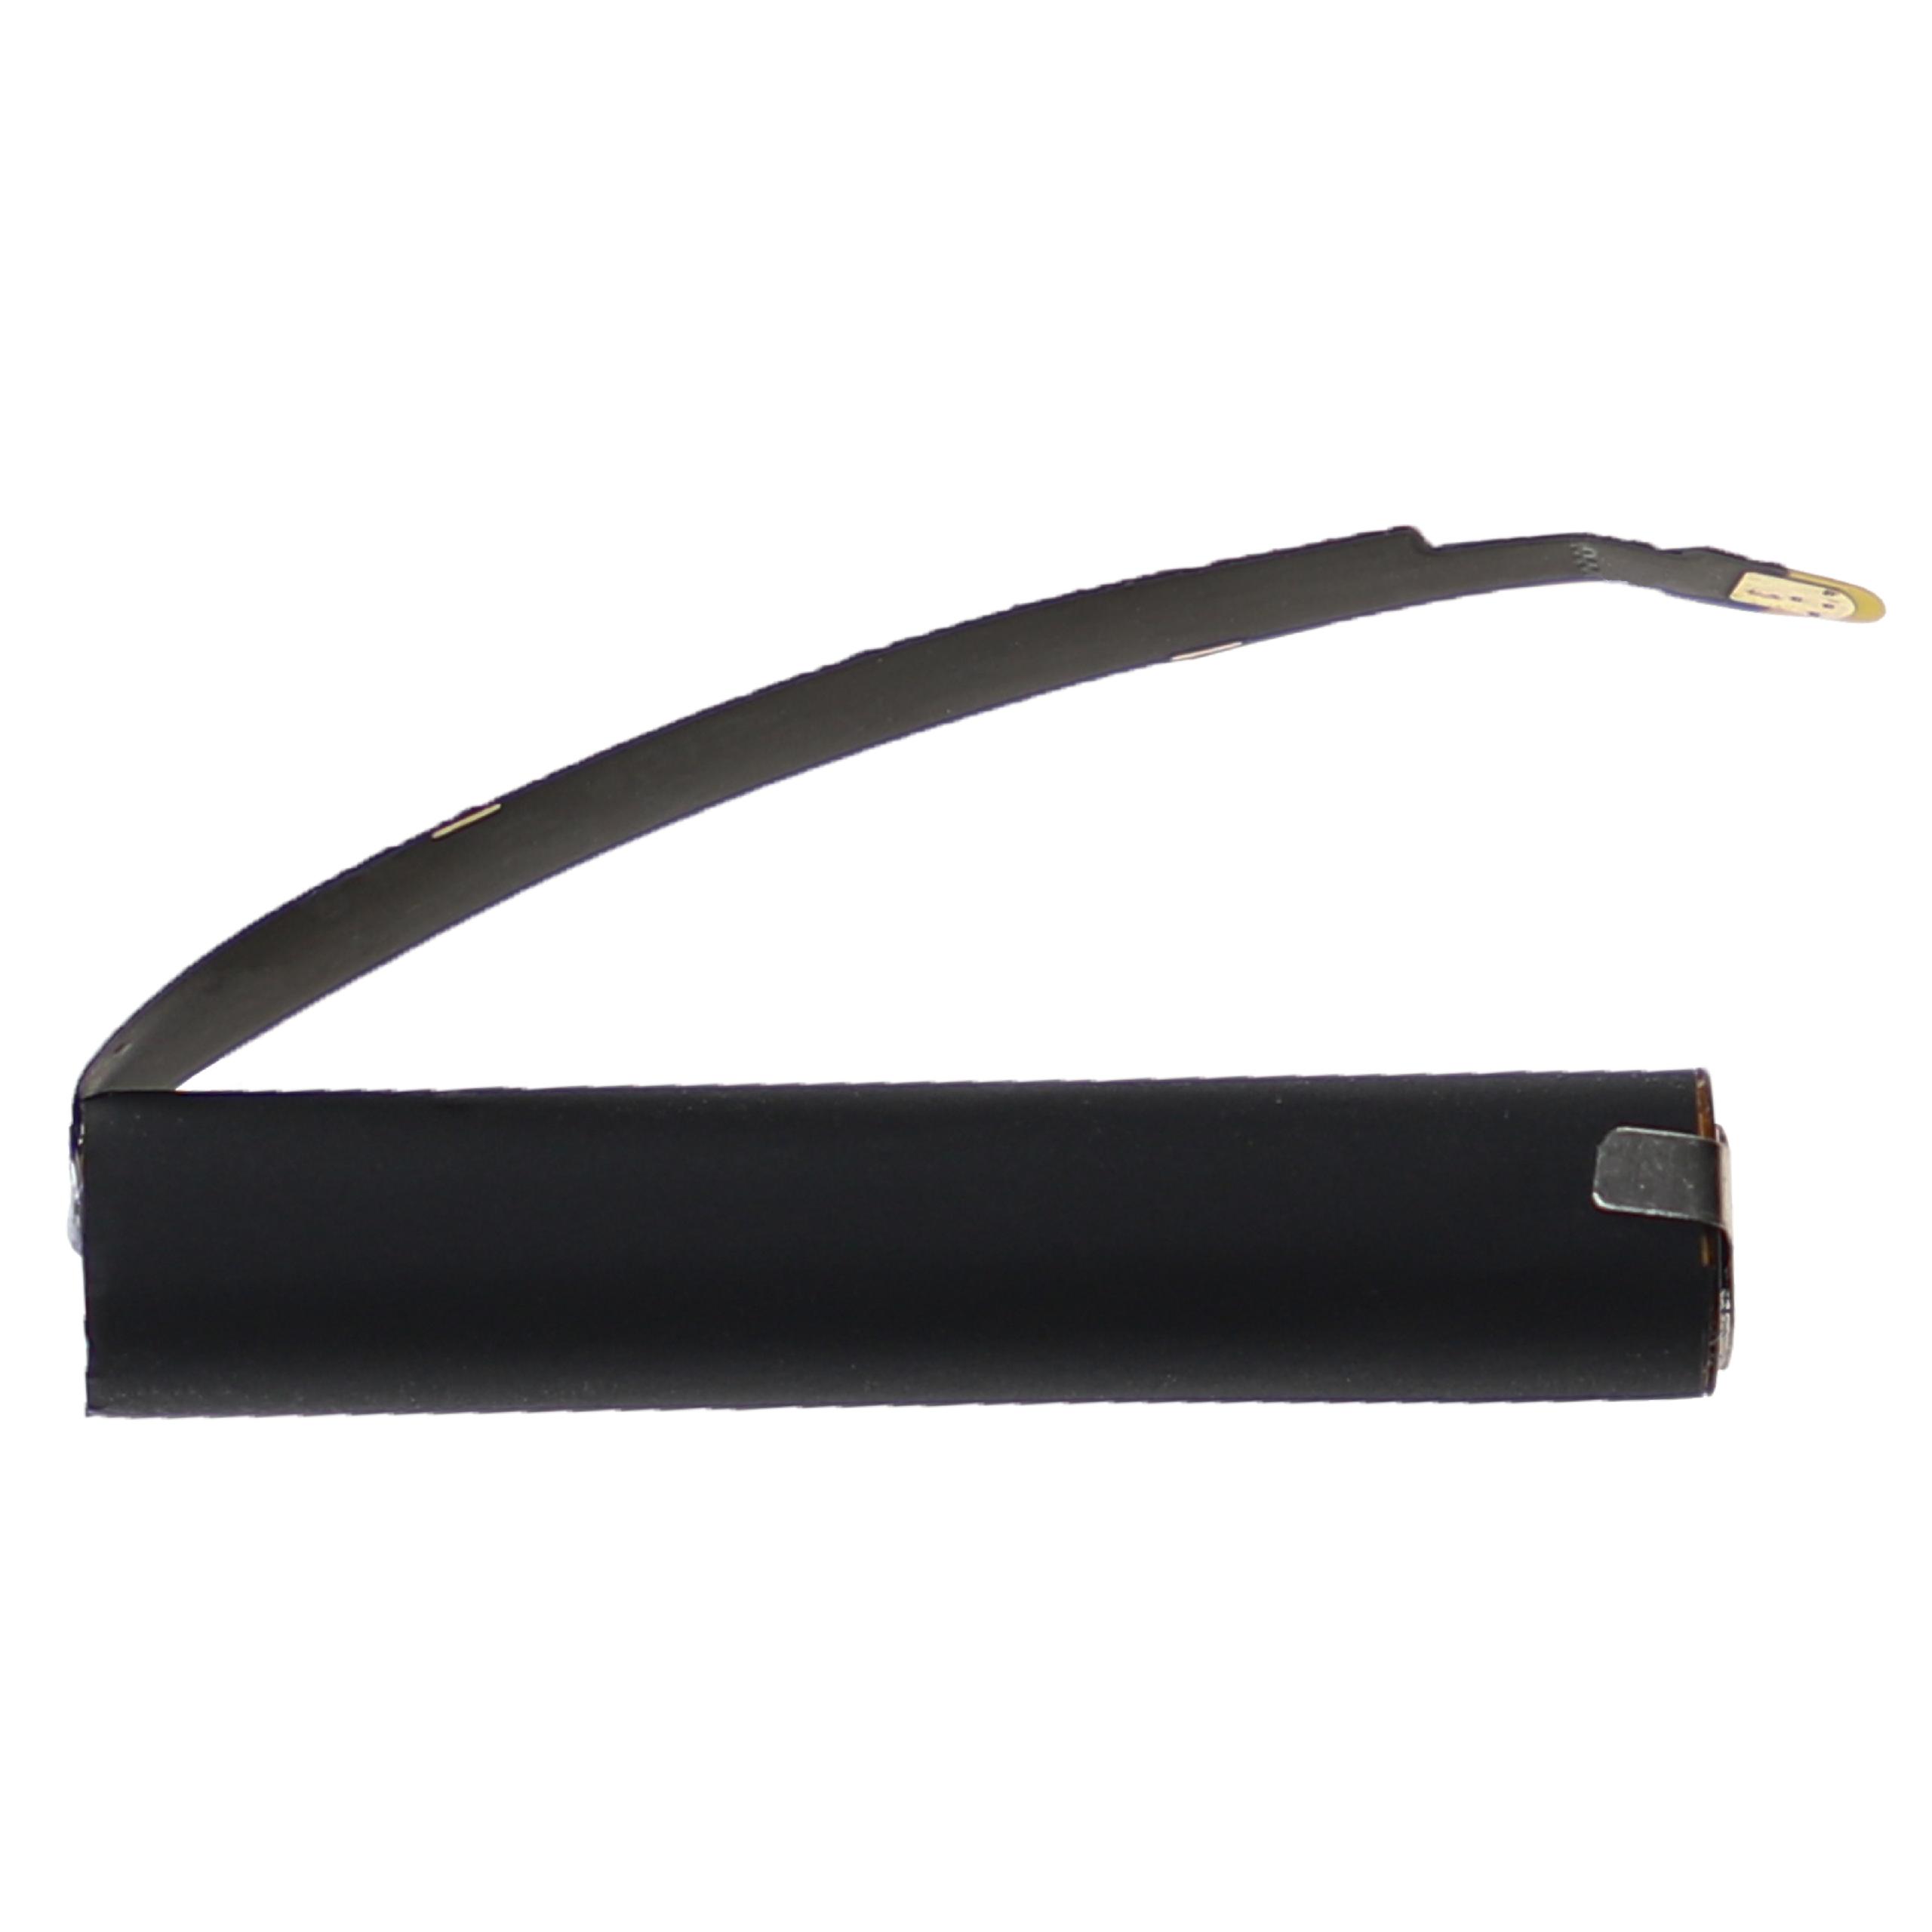 Wireless Headset Battery (2 Units) Replacement for Apple A2032, A2031, A1523, A1722, A1604 - 25mAh 3.7V Li-Ion